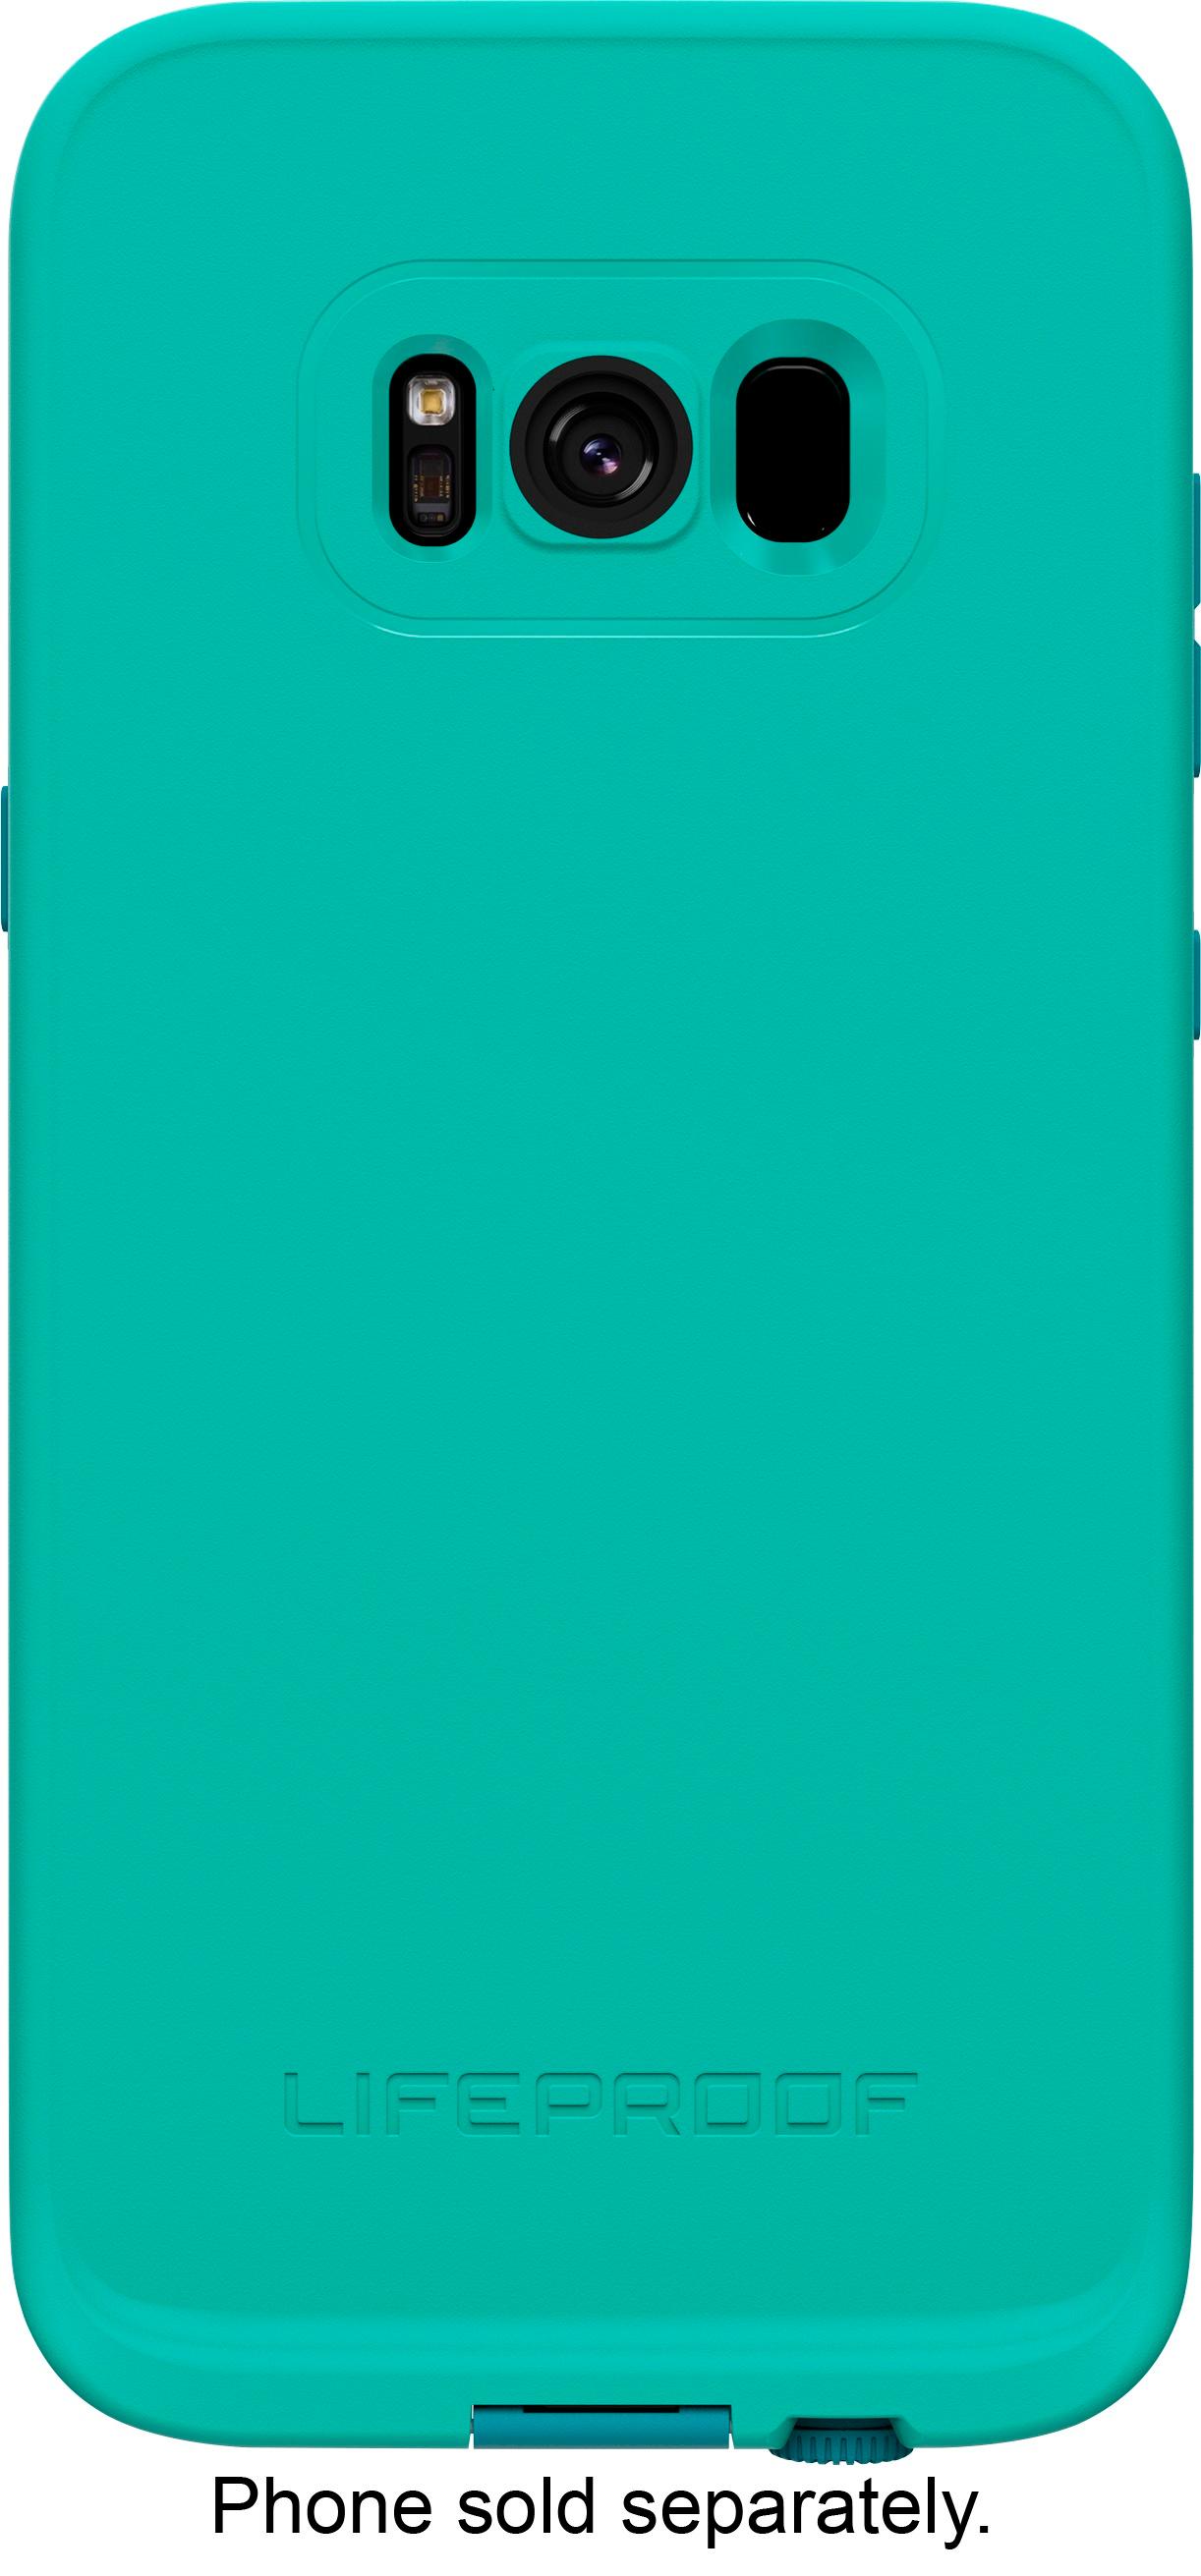 Best Buy Lifeproof Fre Protective Water Resistant Case For Samsung Galaxy S8 Sunset Bay Teal 77 54827